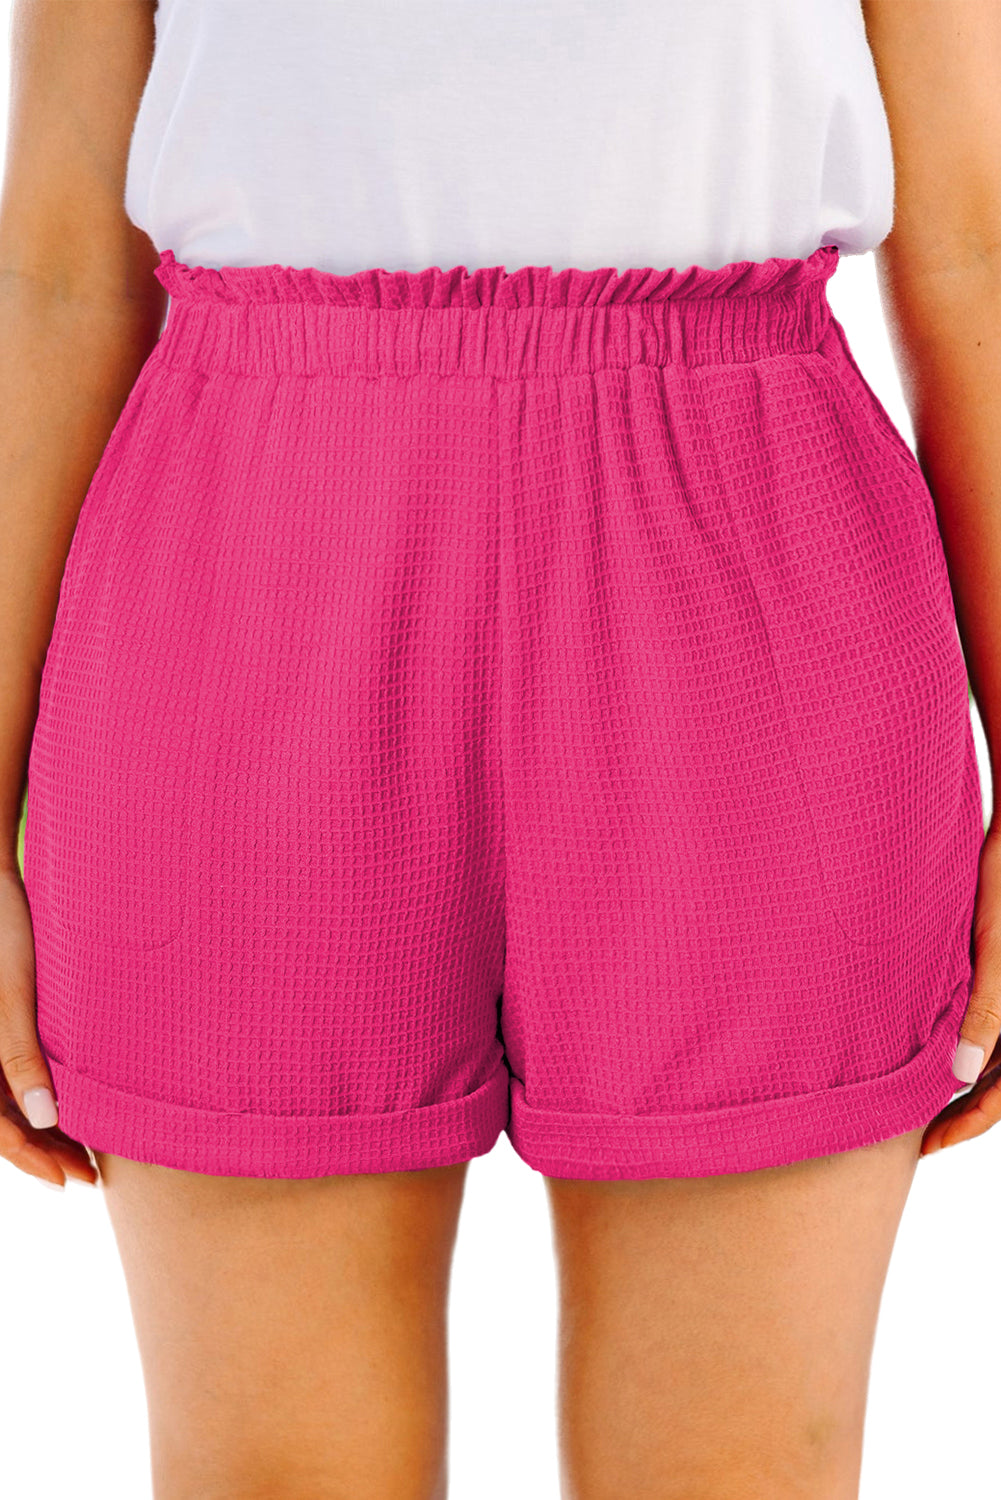 Bright Pink Plus Size Rolled Edge Ruffled Elastic Waist Textured Shorts Pre Order Plus Size JT's Designer Fashion